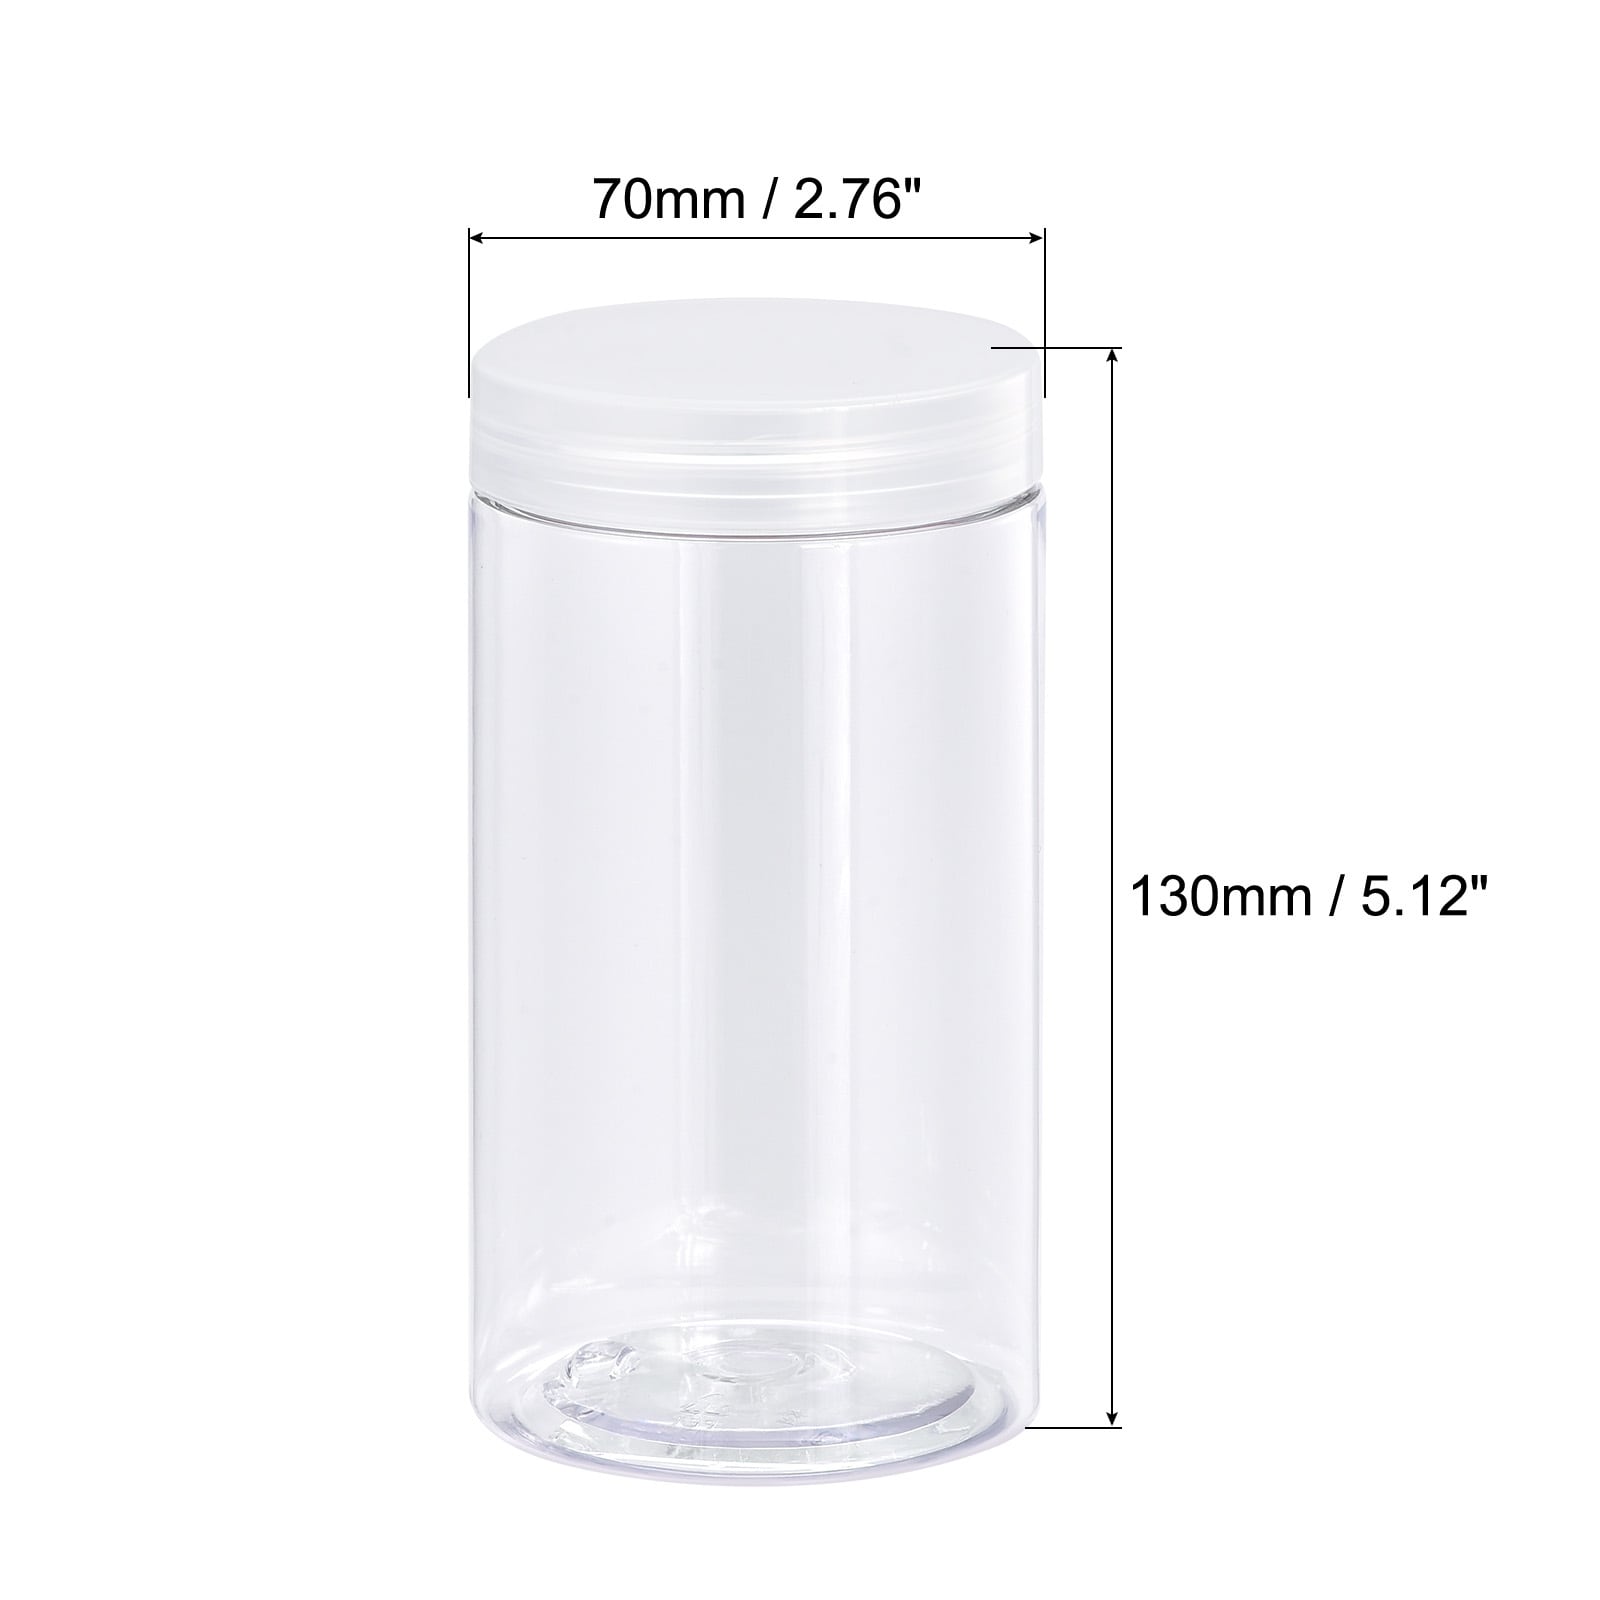 https://ak1.ostkcdn.com/images/products/is/images/direct/1ee4d760944204497818a2165c8e6bbe7d35b0dc/Round-Plastic-Jars-with-Transparent-Screw-Top-Lid%2C-2Pcs.jpg